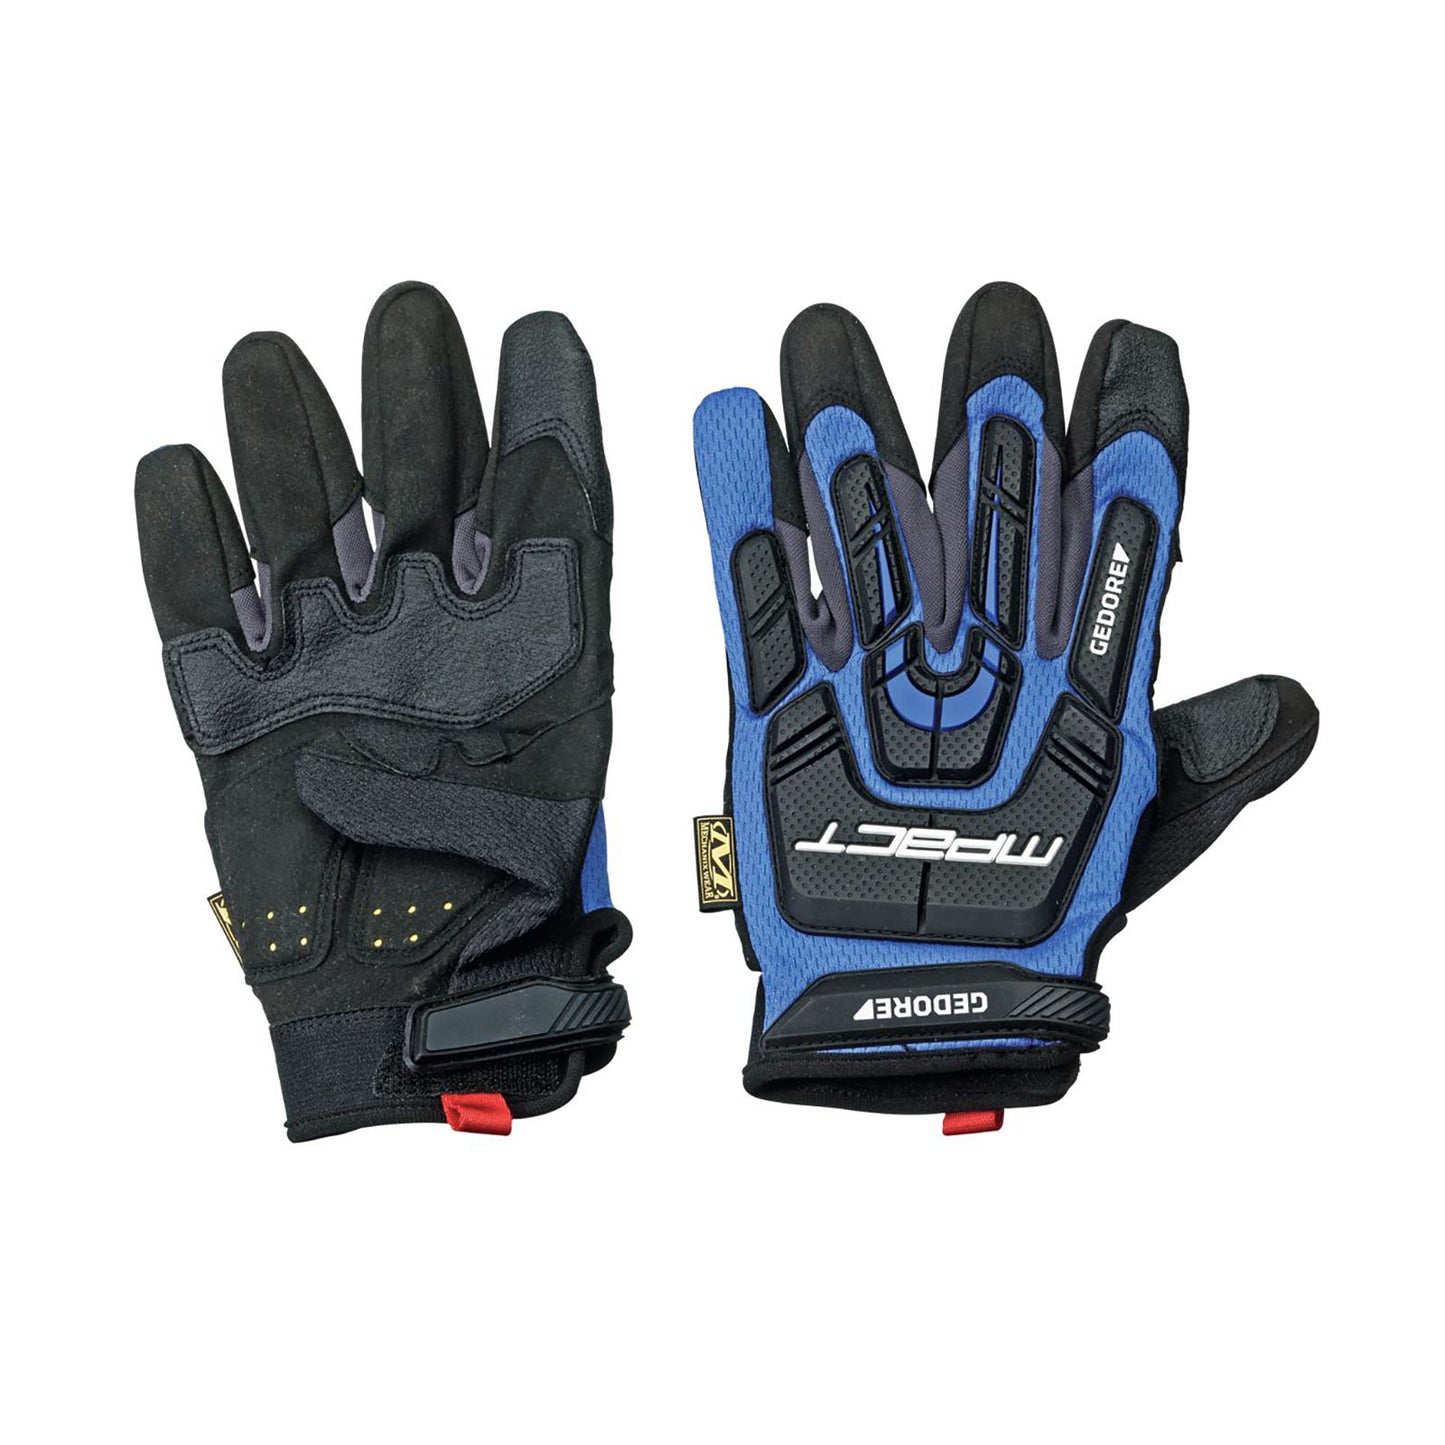 GEDORE 922 8 - M-PACT Gloves Size S/8 (1938738)